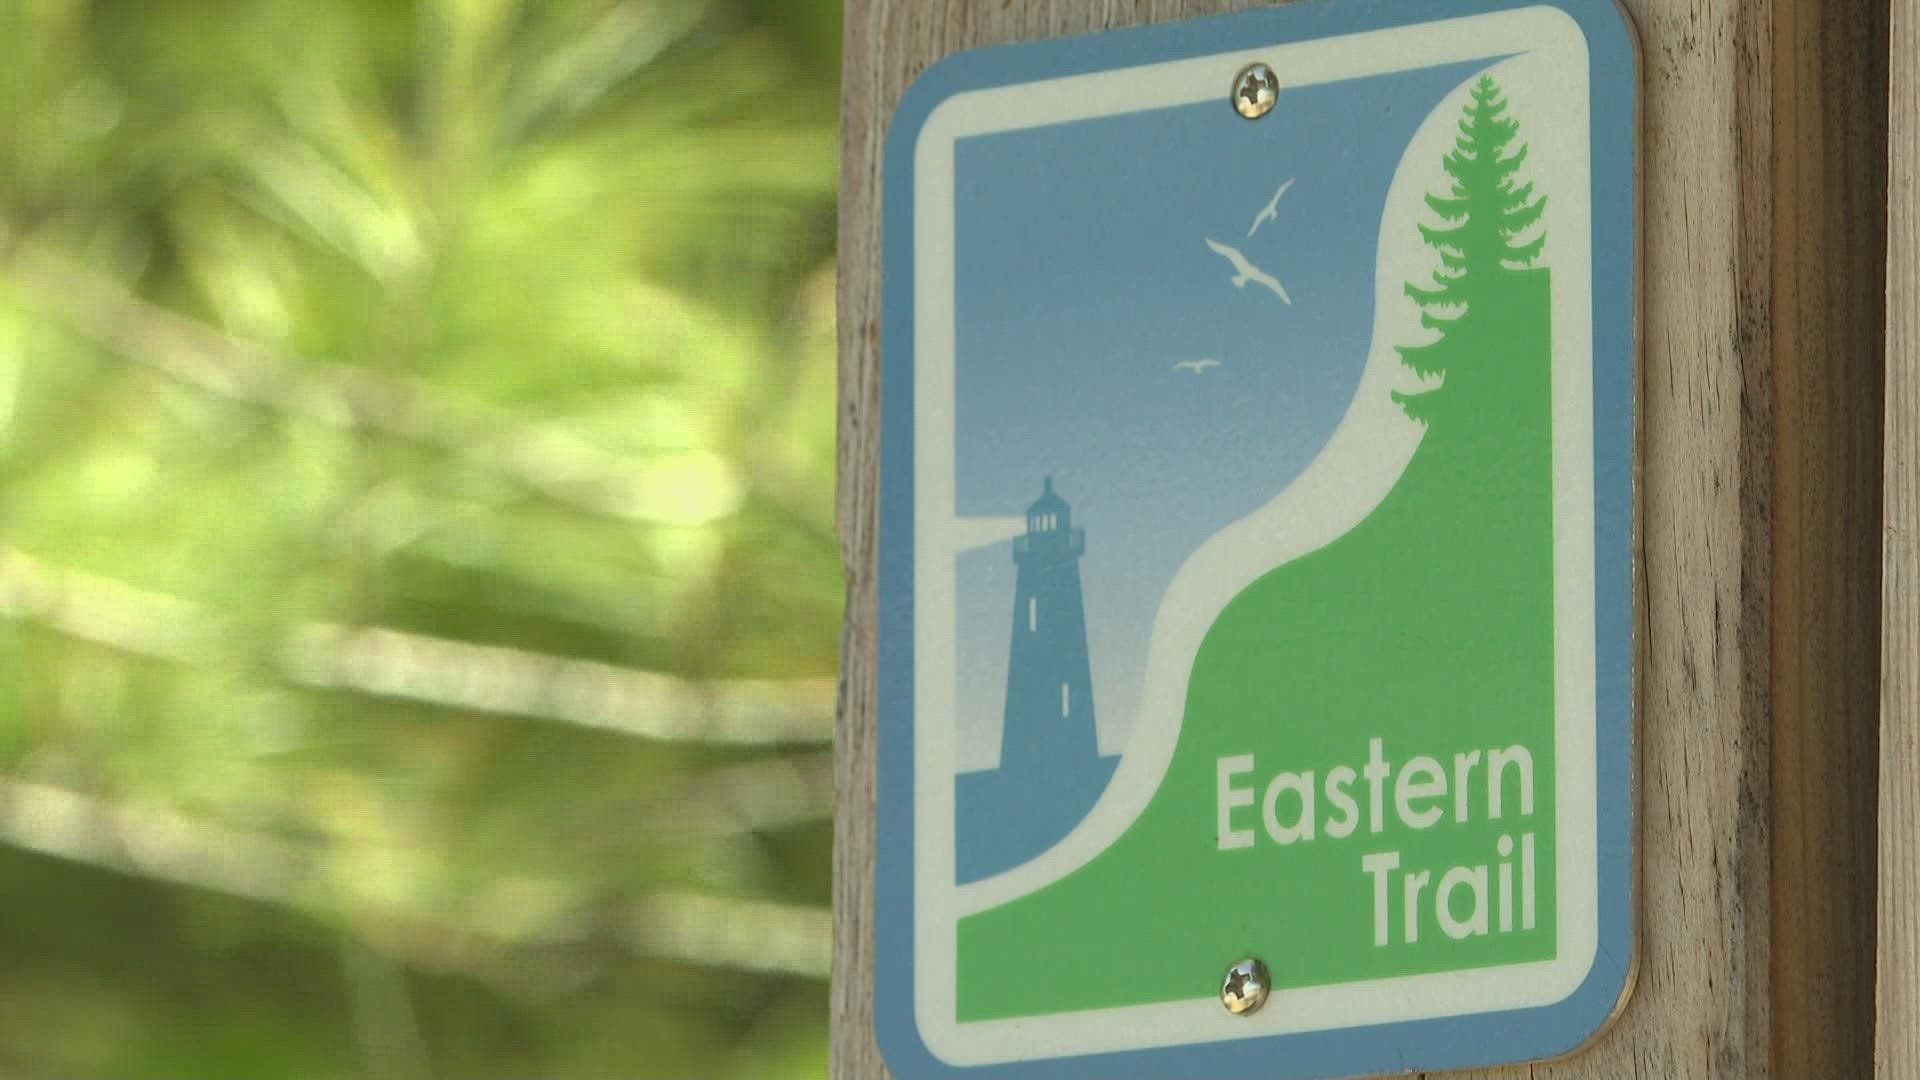 A $700,000 federal grant will help convert on-road trail portions of 55-mile network to off-road.